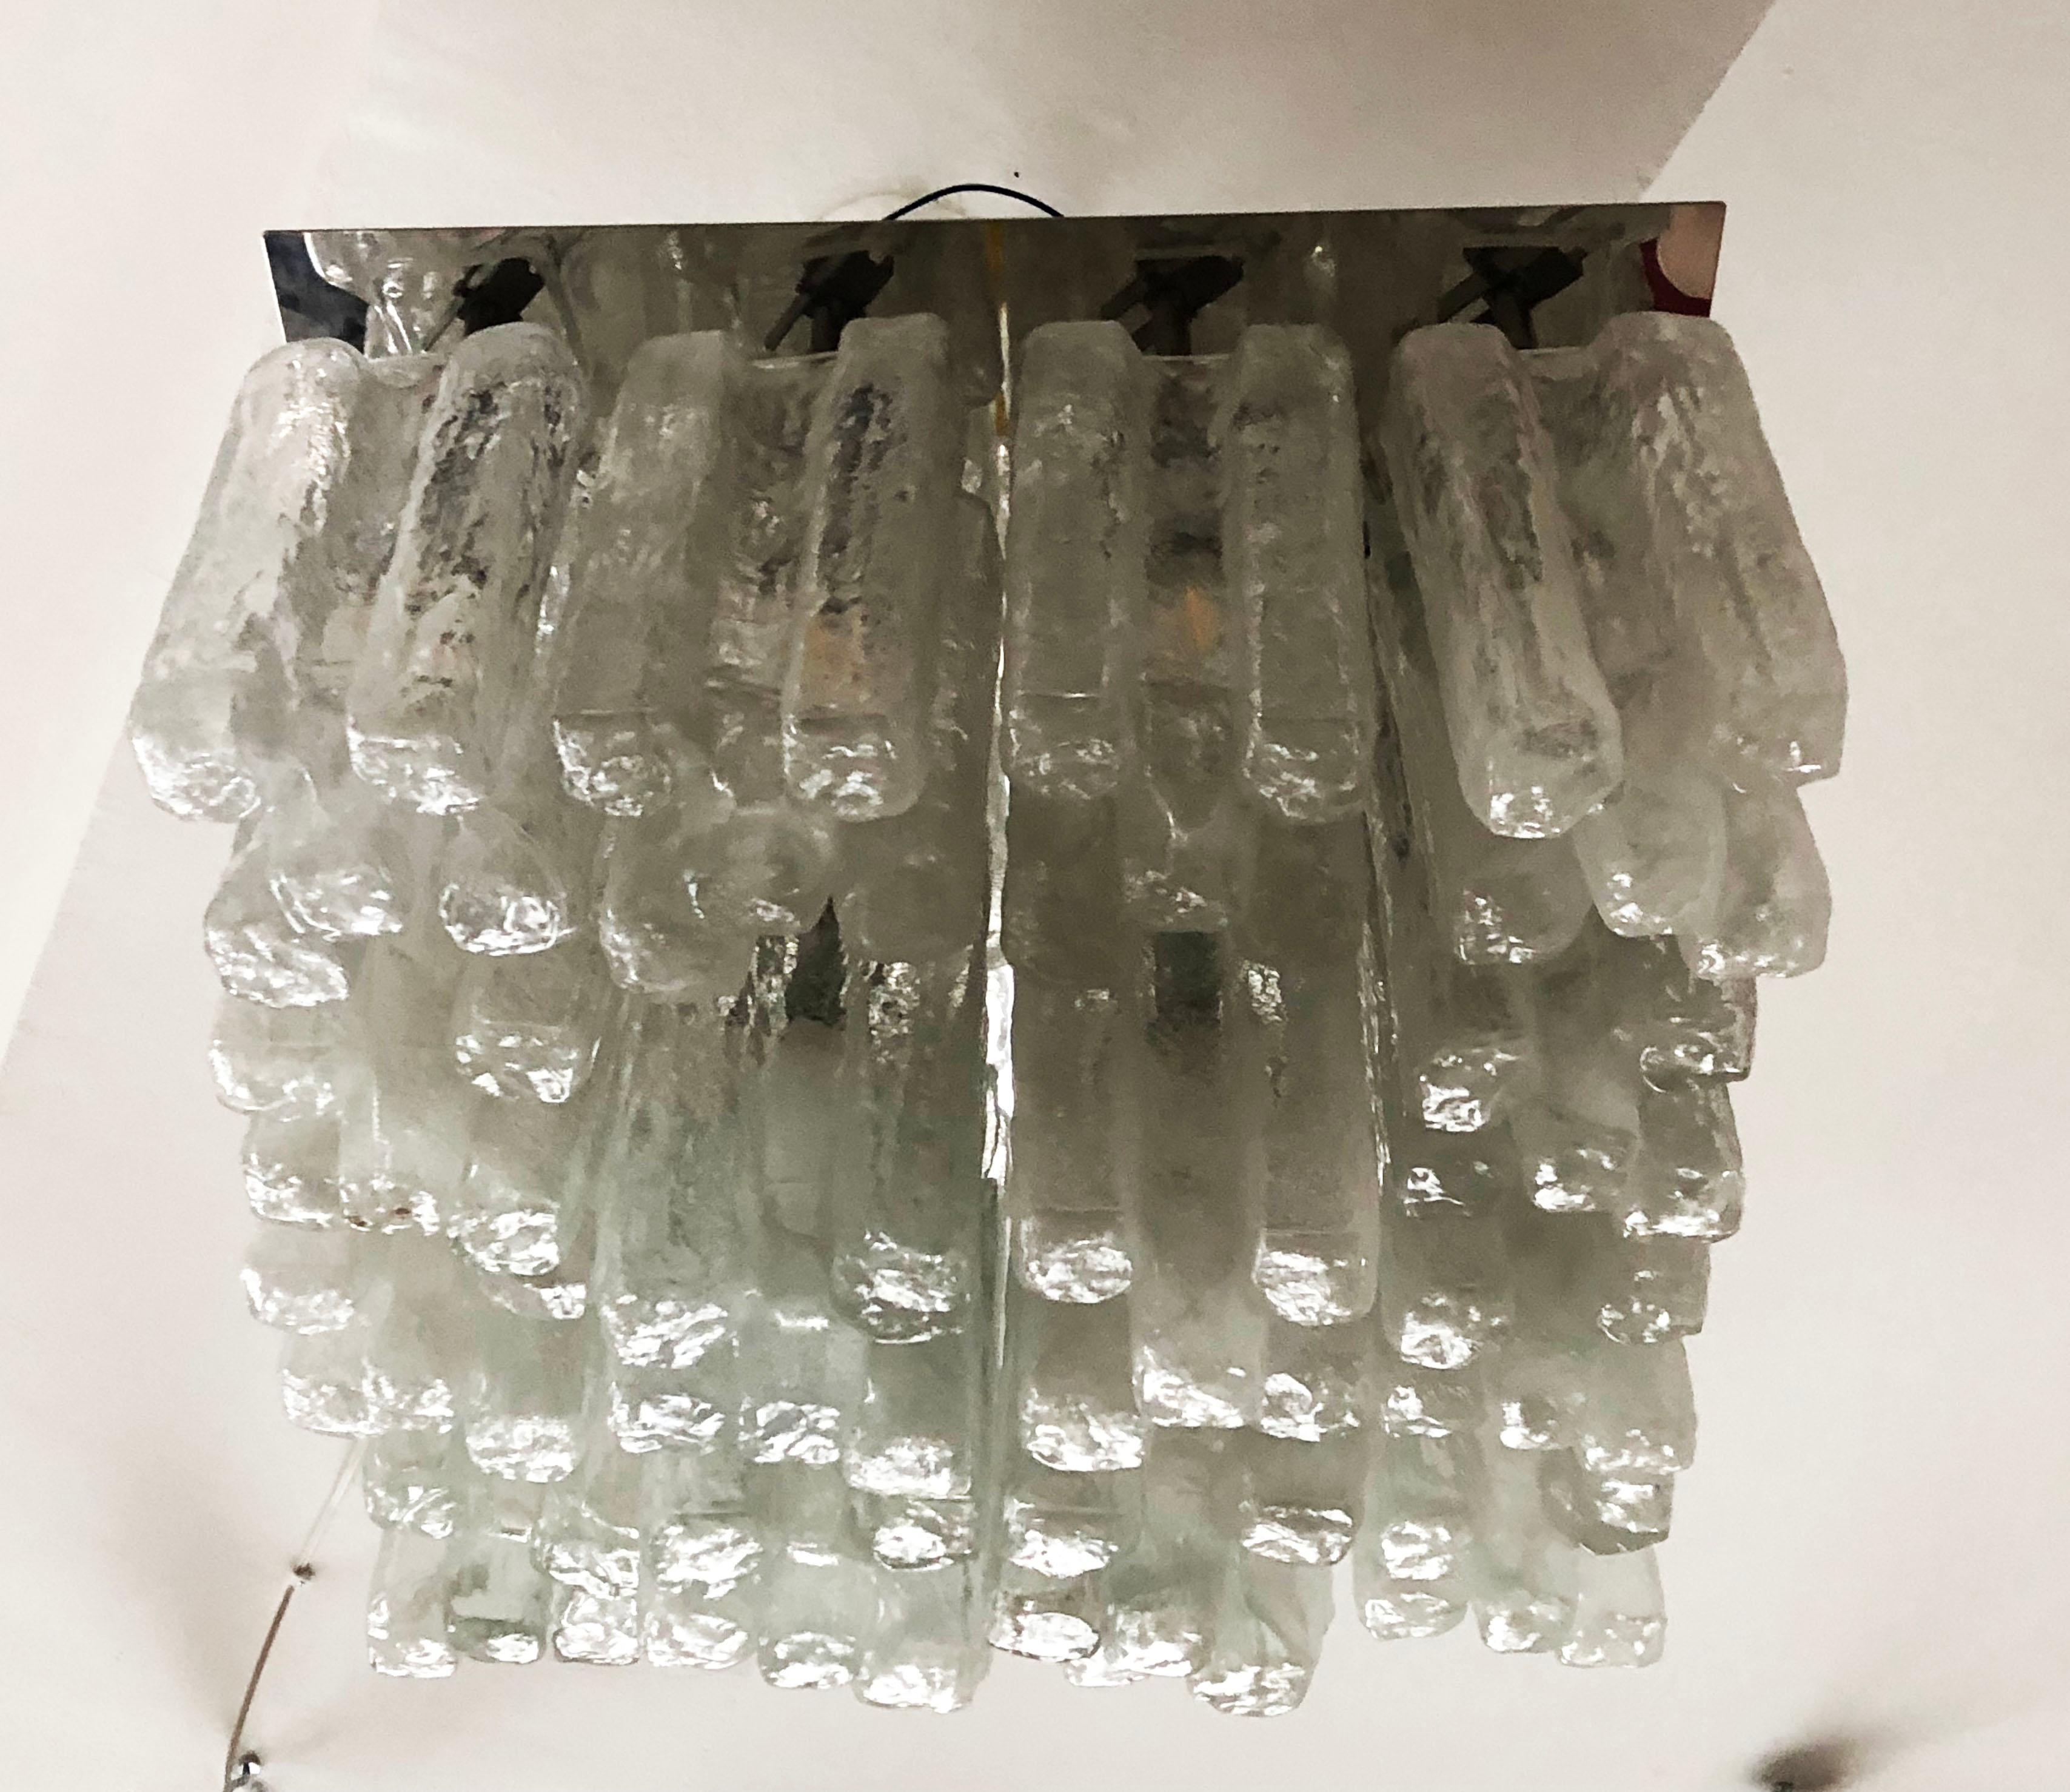 Beautiful chandelier made of nickel plated brass plate with 16 hand-blown glass shades, each fitted with E14 sockets. Made by. J.T. Kalmar in the 1970s.